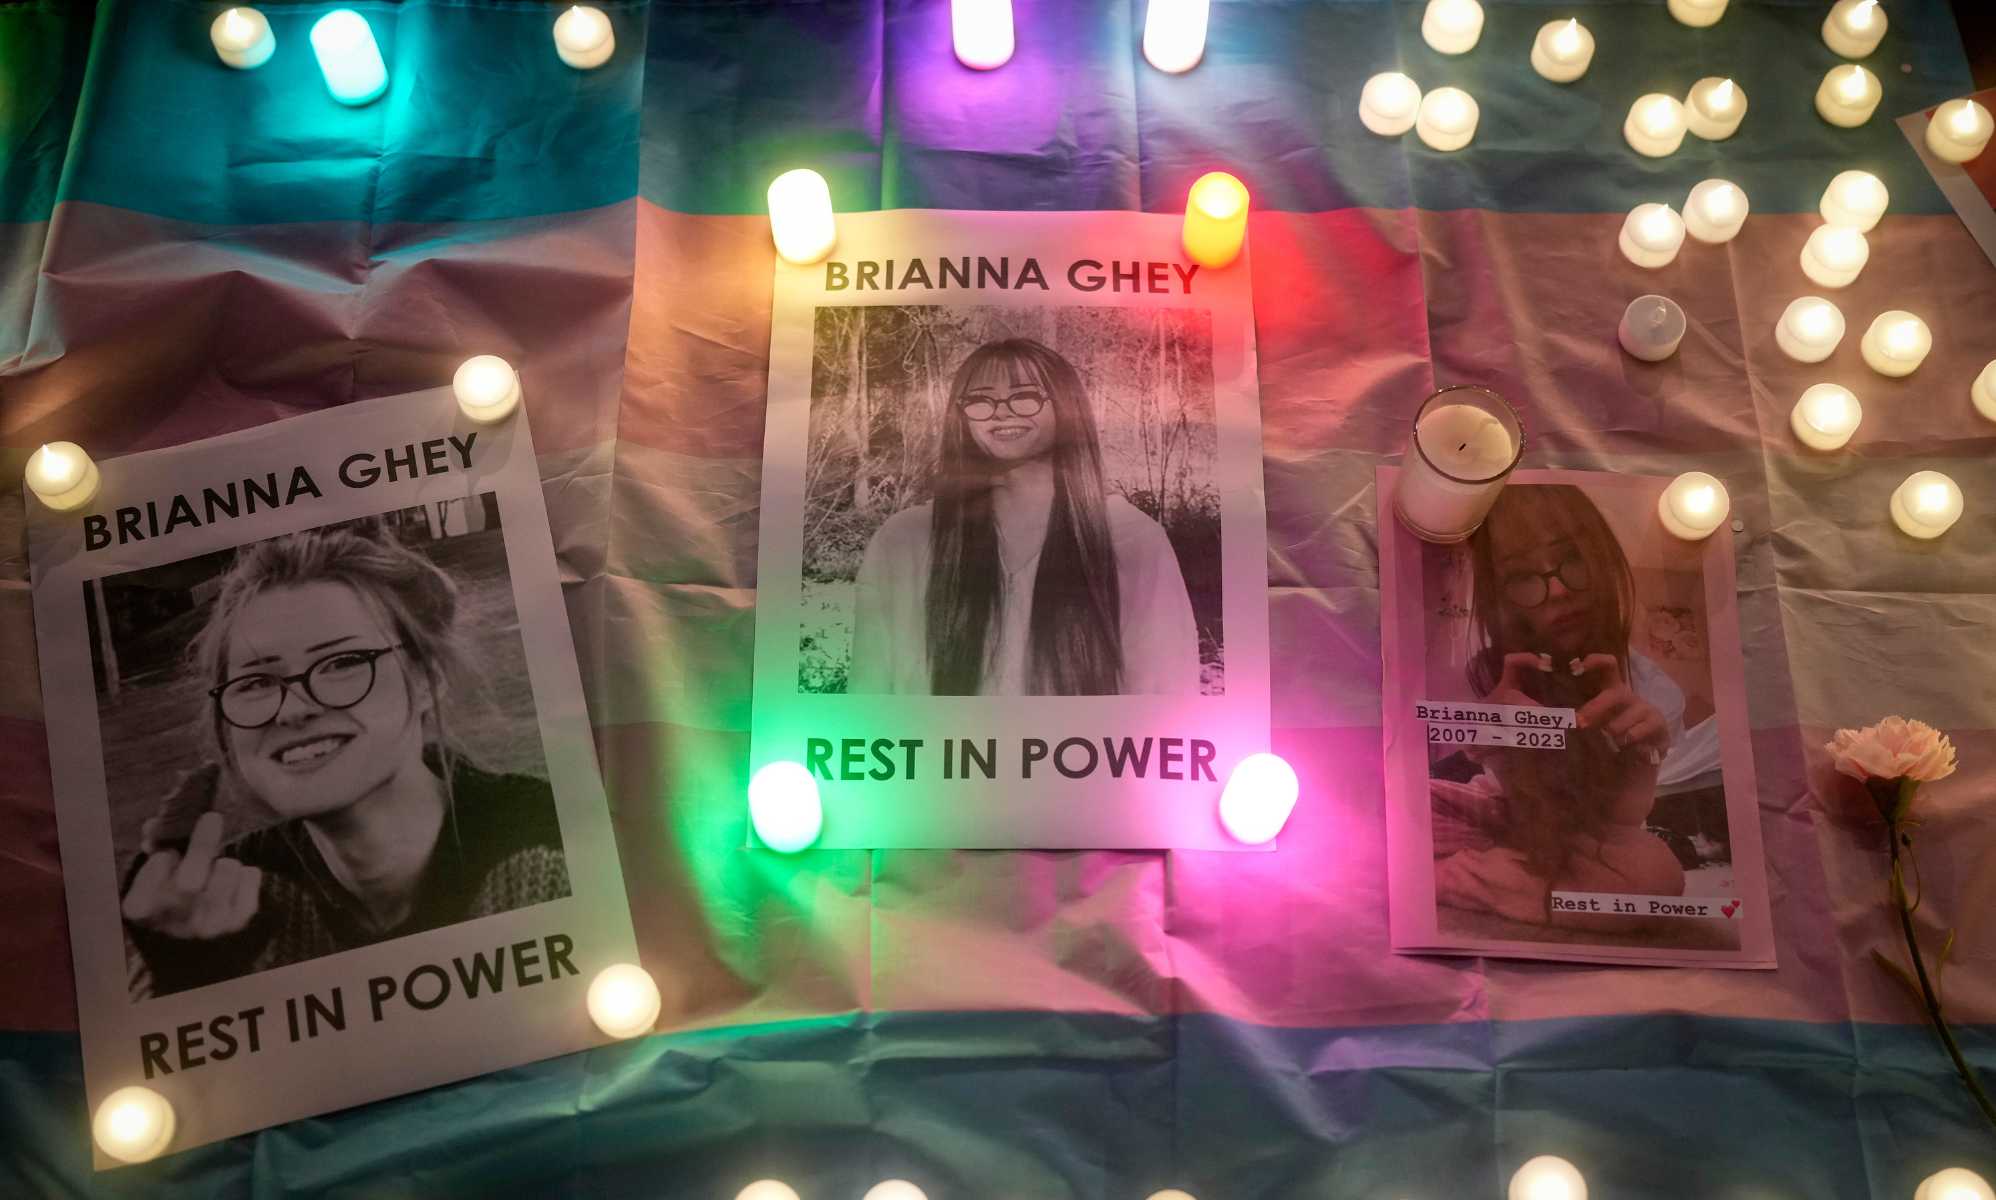 Candle-lit vigils in memory of trans girl Brianna Ghey after being